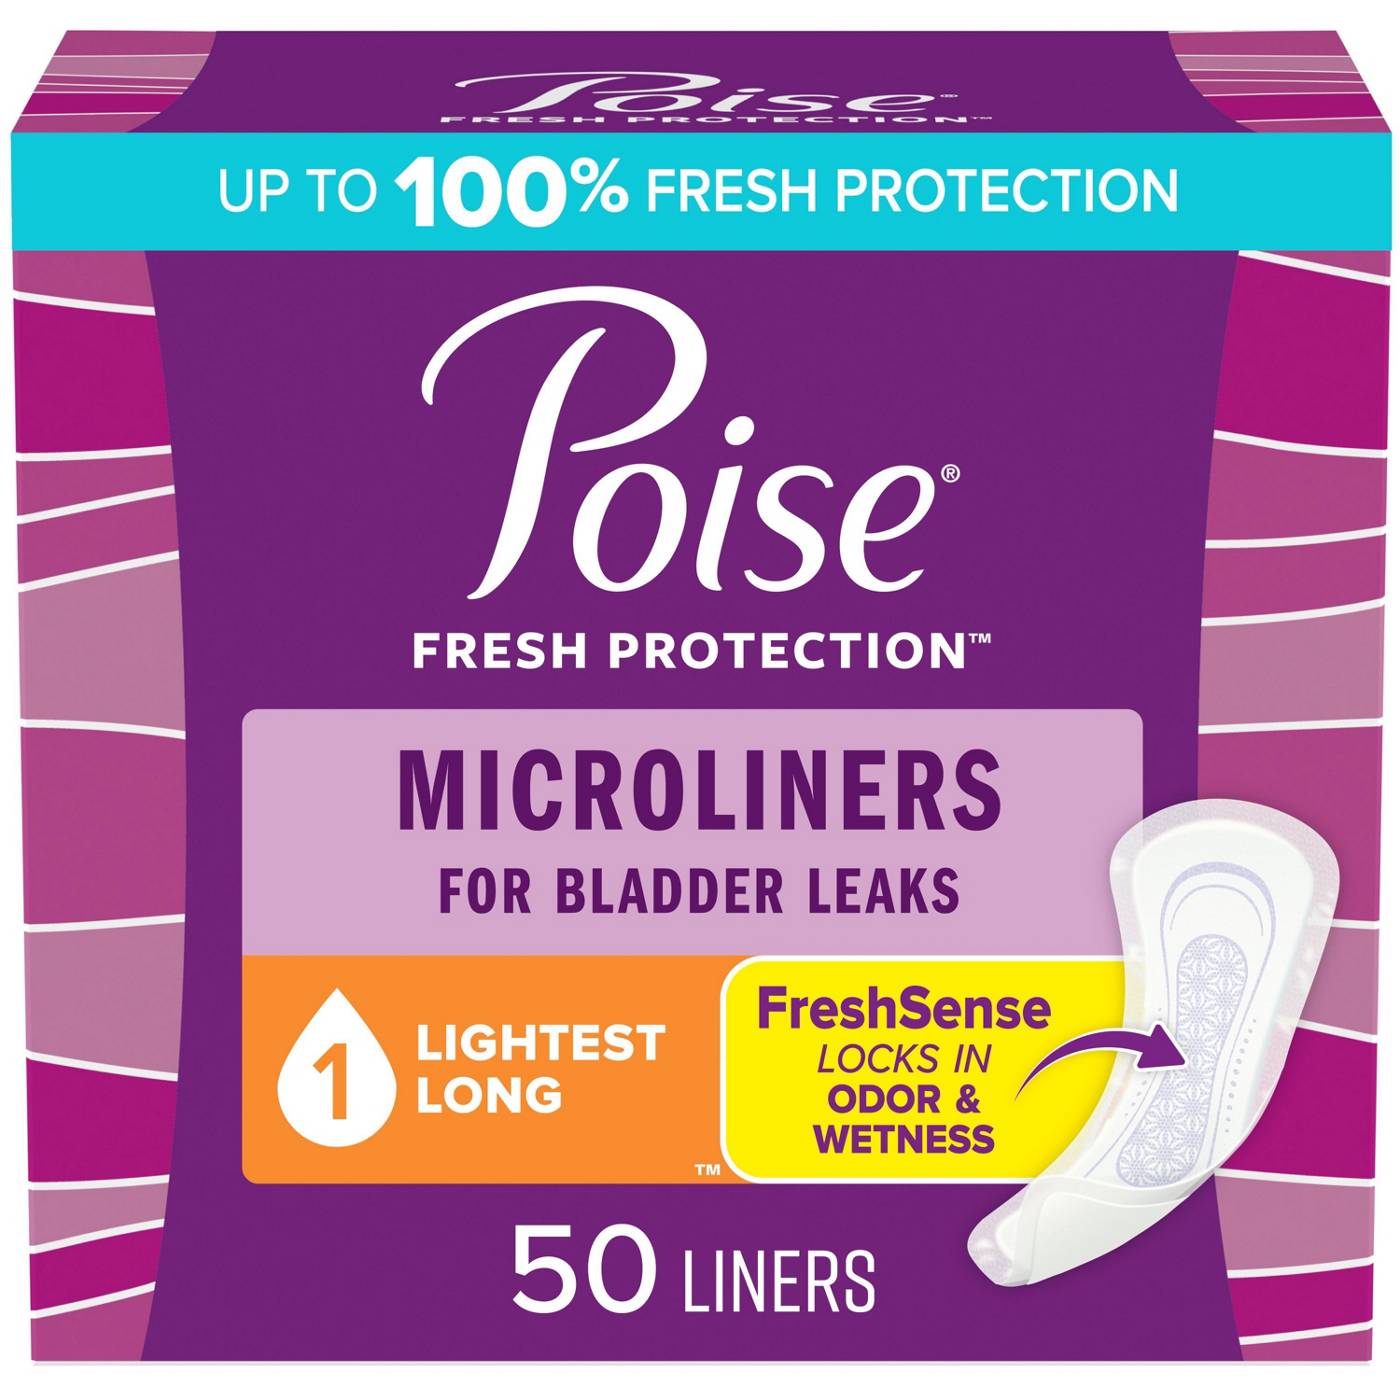 Poise Fresh Protection Microliners Size 1 Lightest Long; image 1 of 5